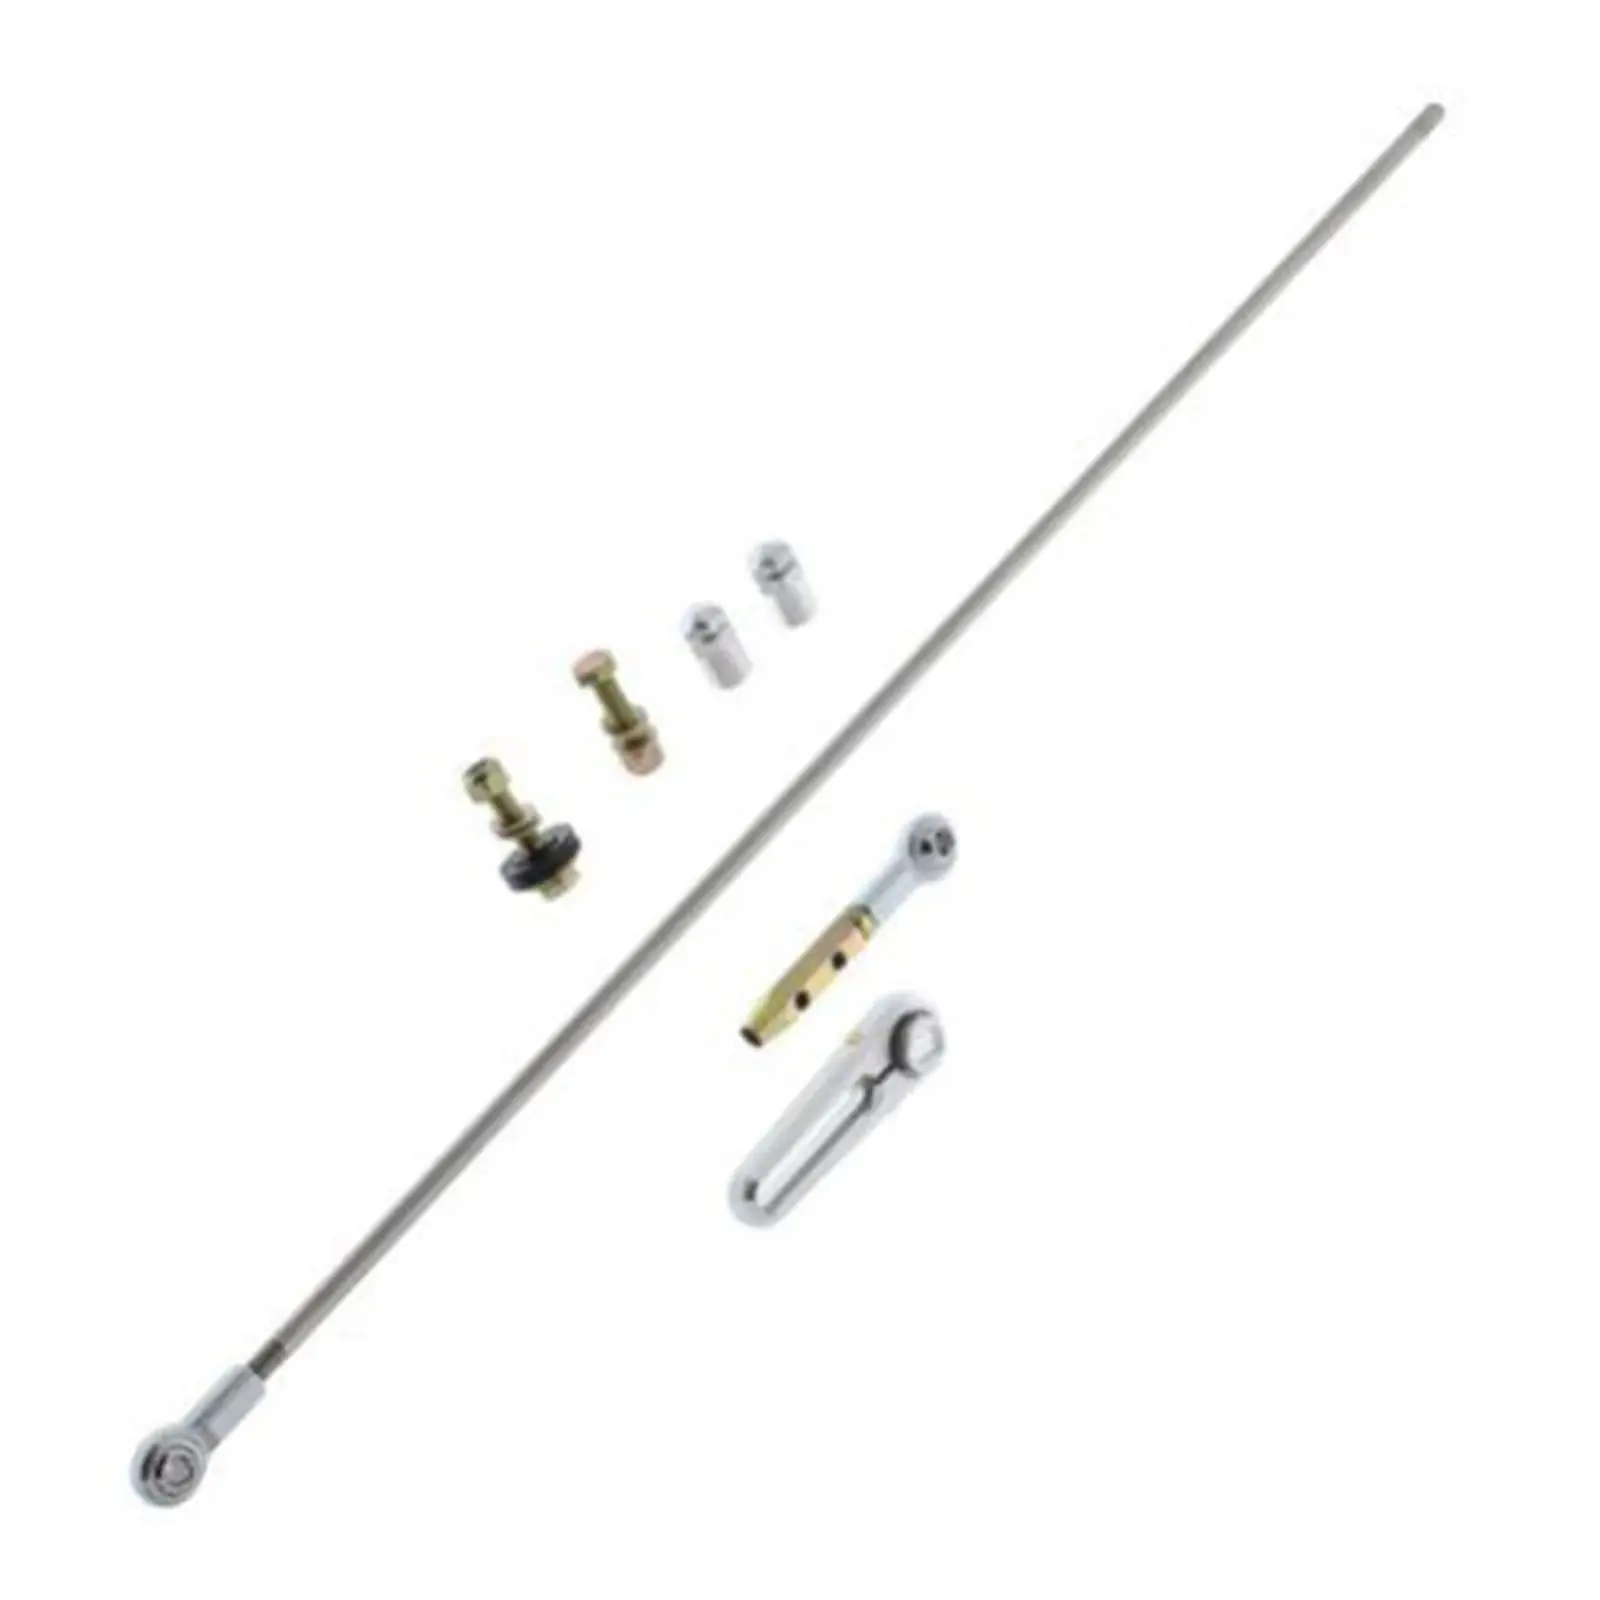 Transmission Column Shift Linkage Kit Easily Install Adjustable High Performance Car Accessories Replaces for GM 700R4 4L60